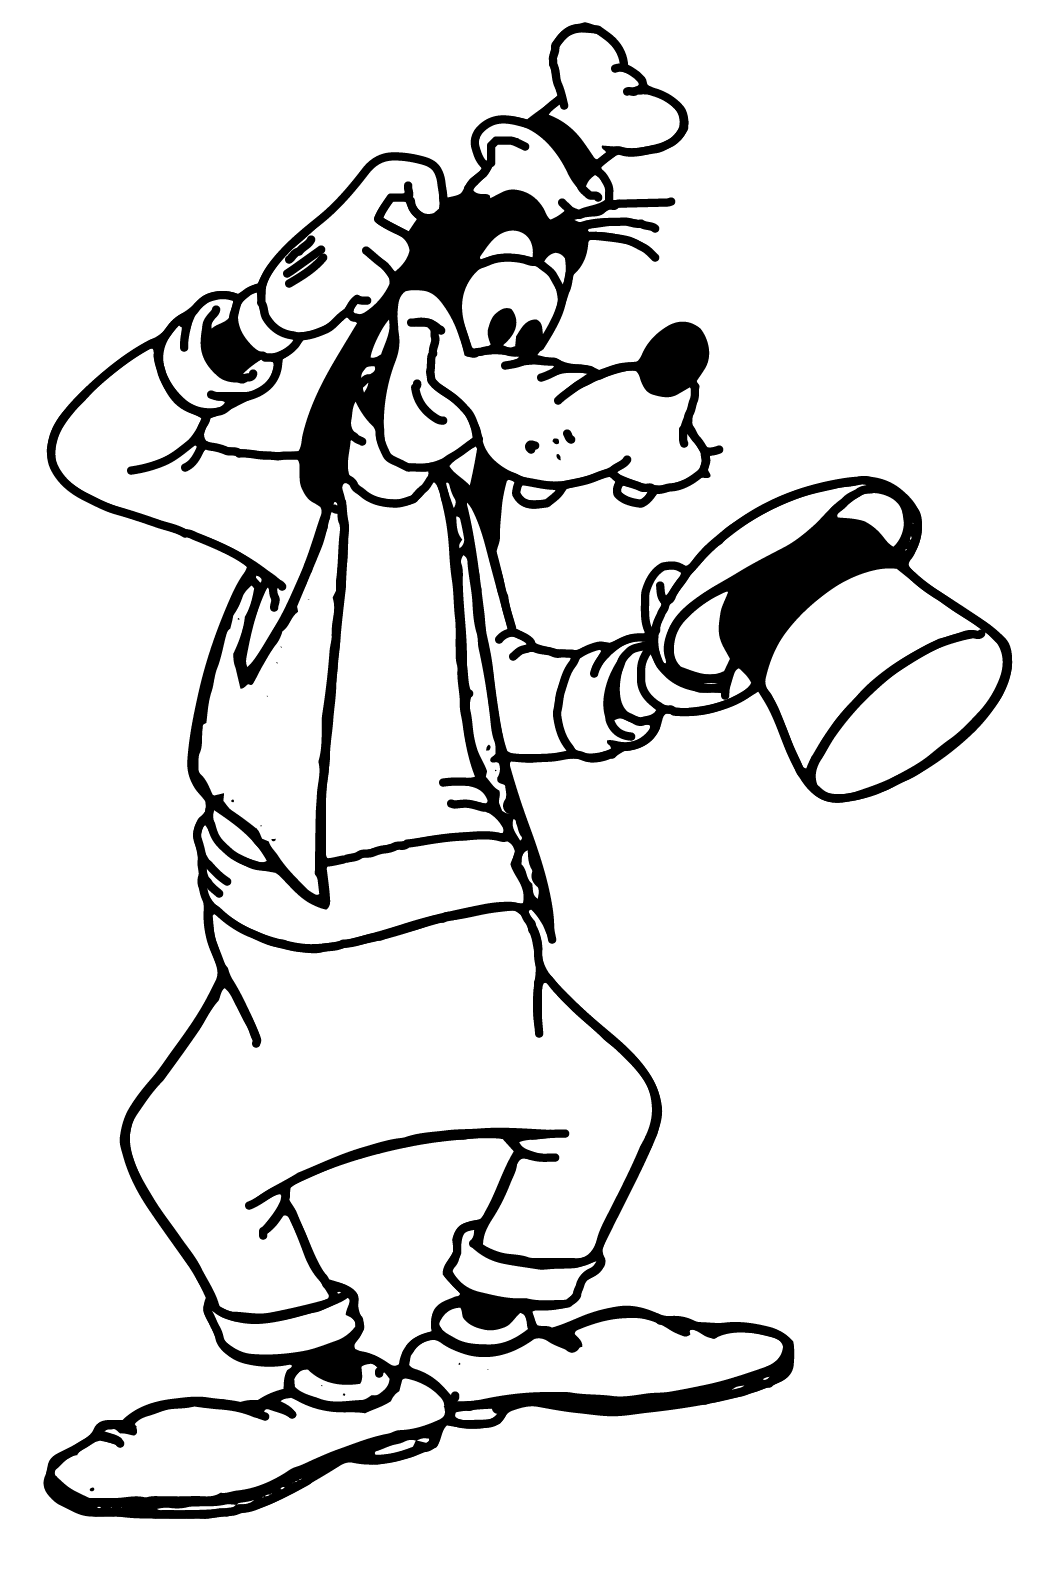 Goofy Coloring Pages For Kids - Coloring Pages Goofy